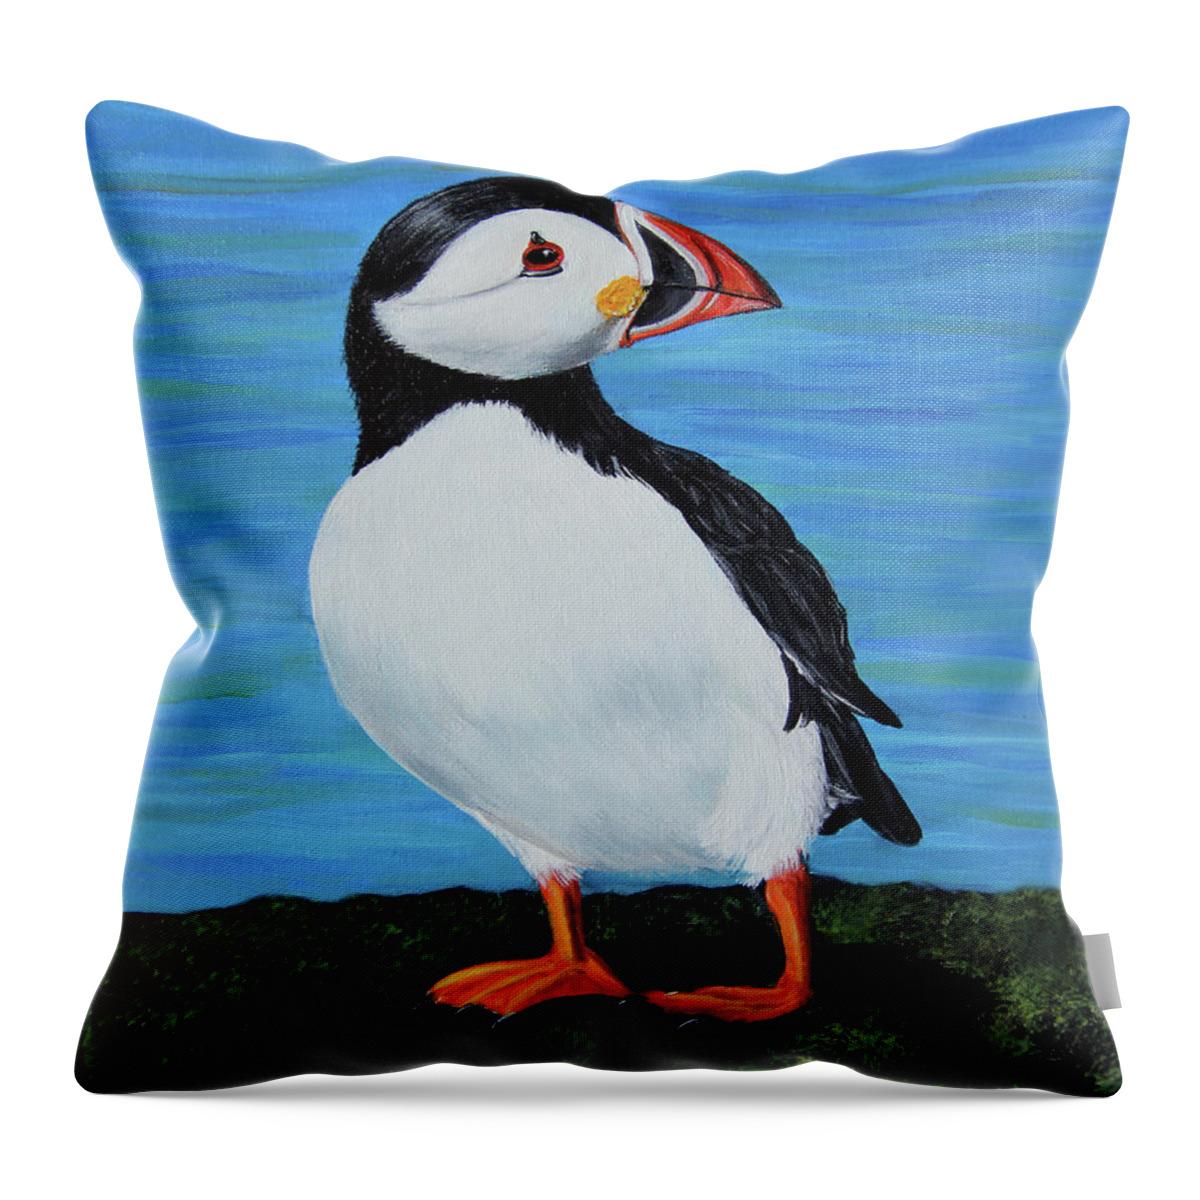 Acrylic Painting Throw Pillow featuring the painting Puffin Joy by Linda Goodman